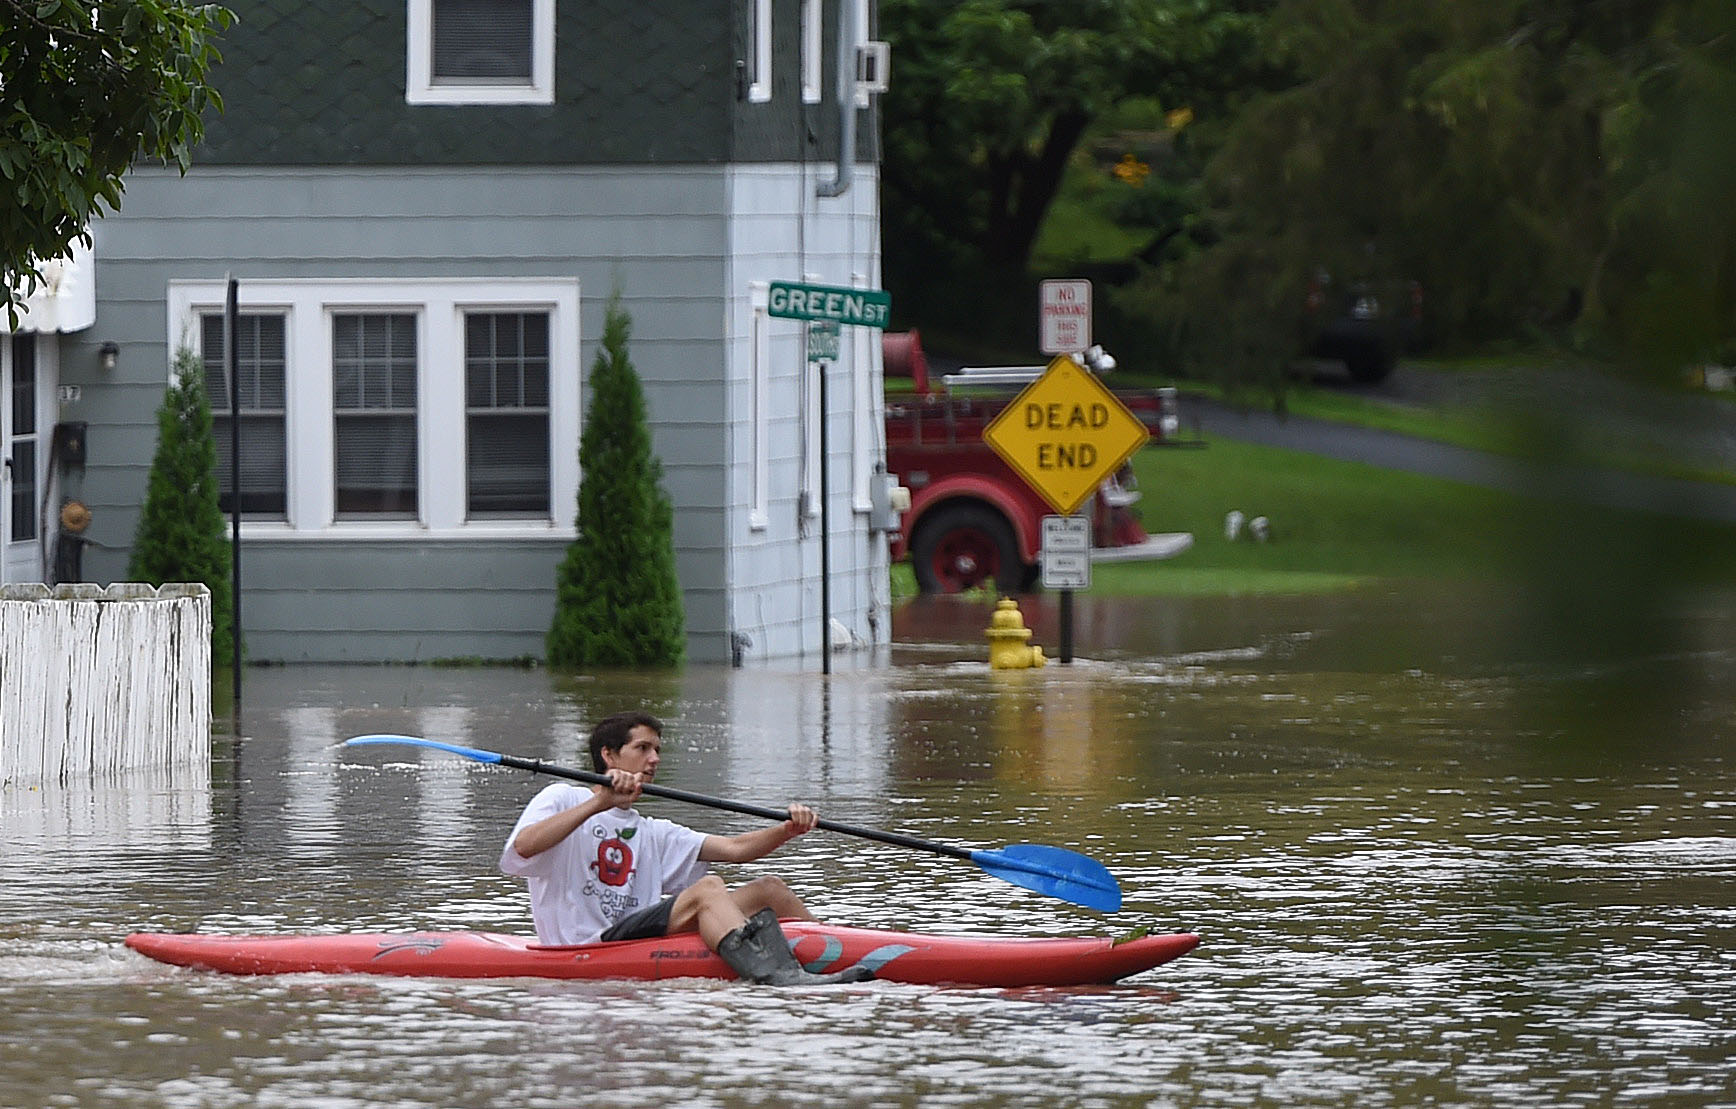 A young man takes his kayak out on Green and South streets August 19, 2021. Heavy rains again created flooding in Central New York. A lot of the flooding occurred along Ninemile Creek in Camillus and Marcellus. Dennis Nett | dnett@syracuse.com